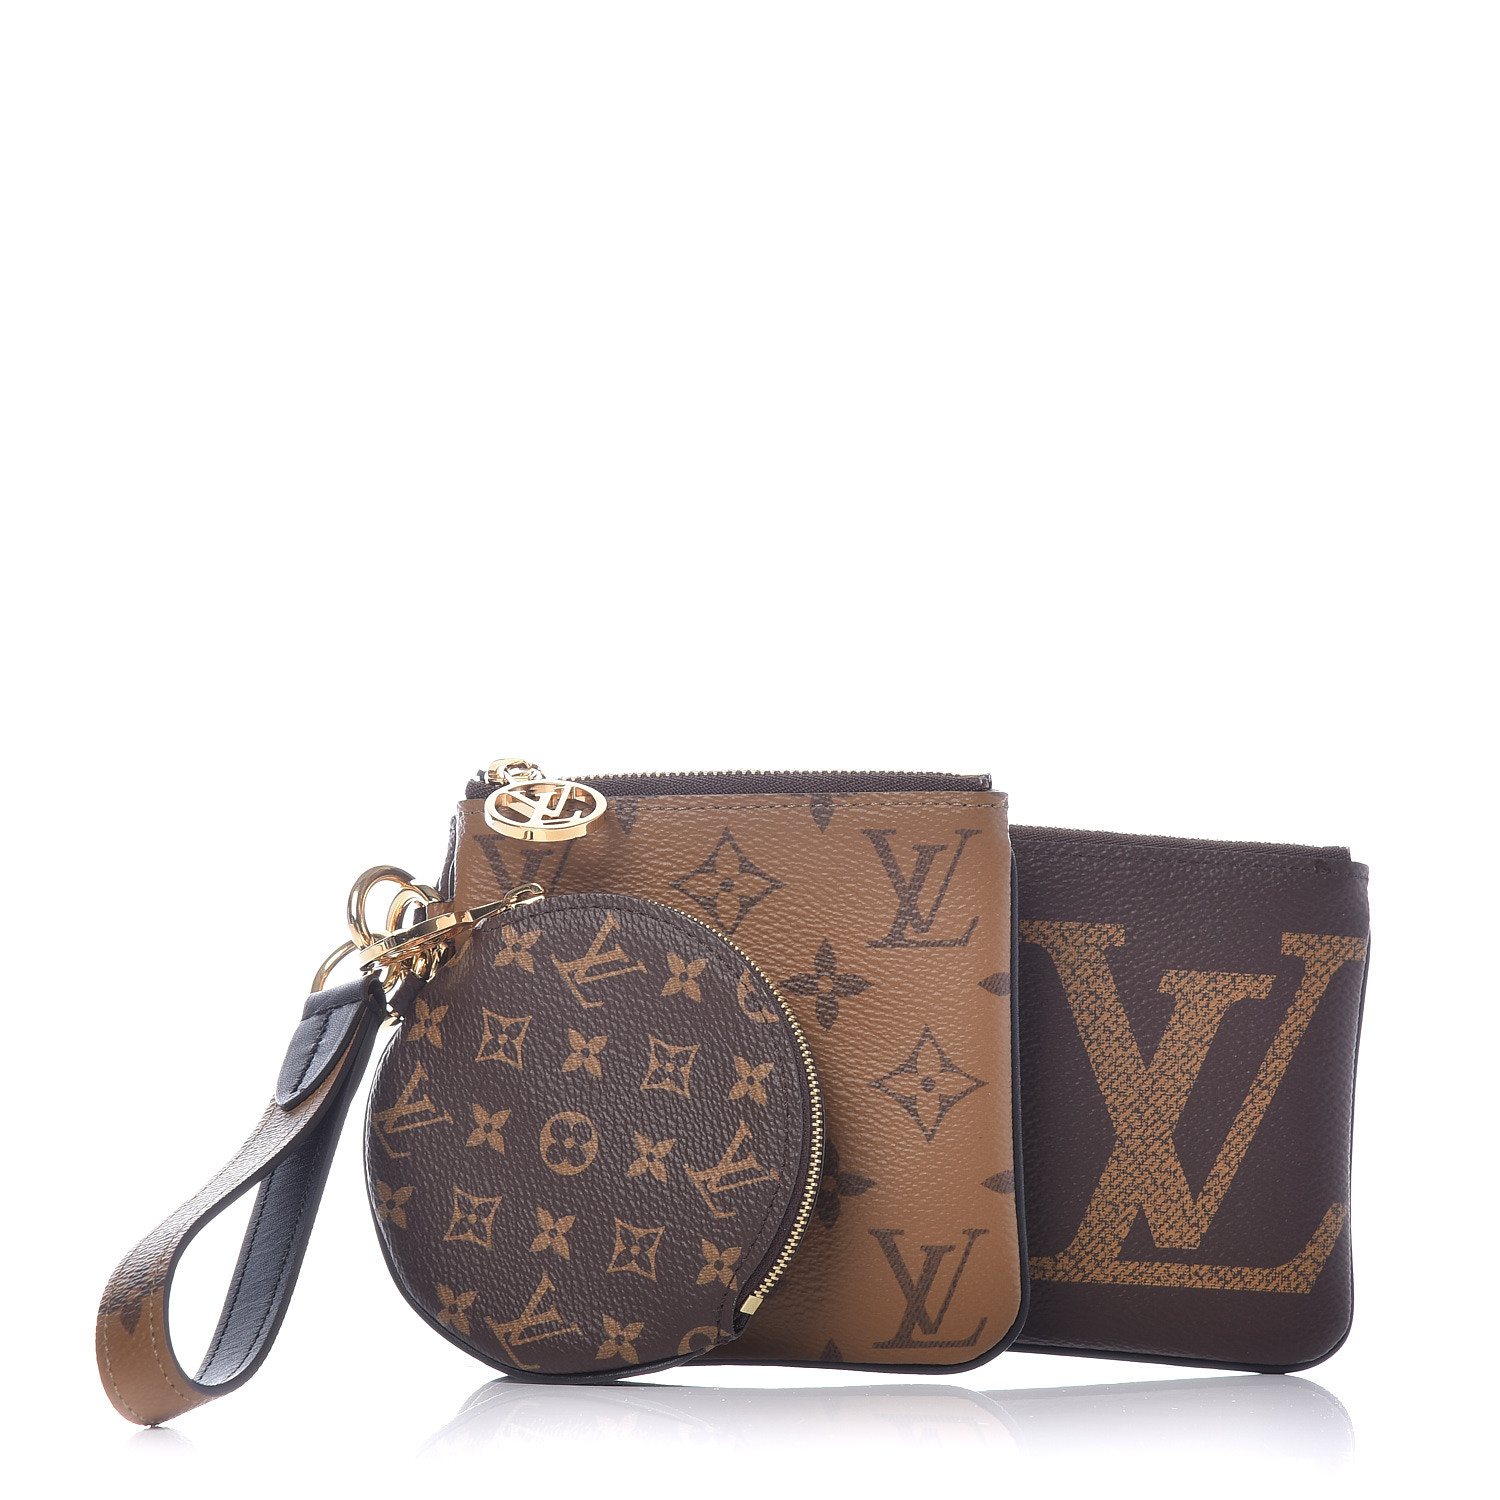 Lv Trio Pouch Review  Natural Resource Department